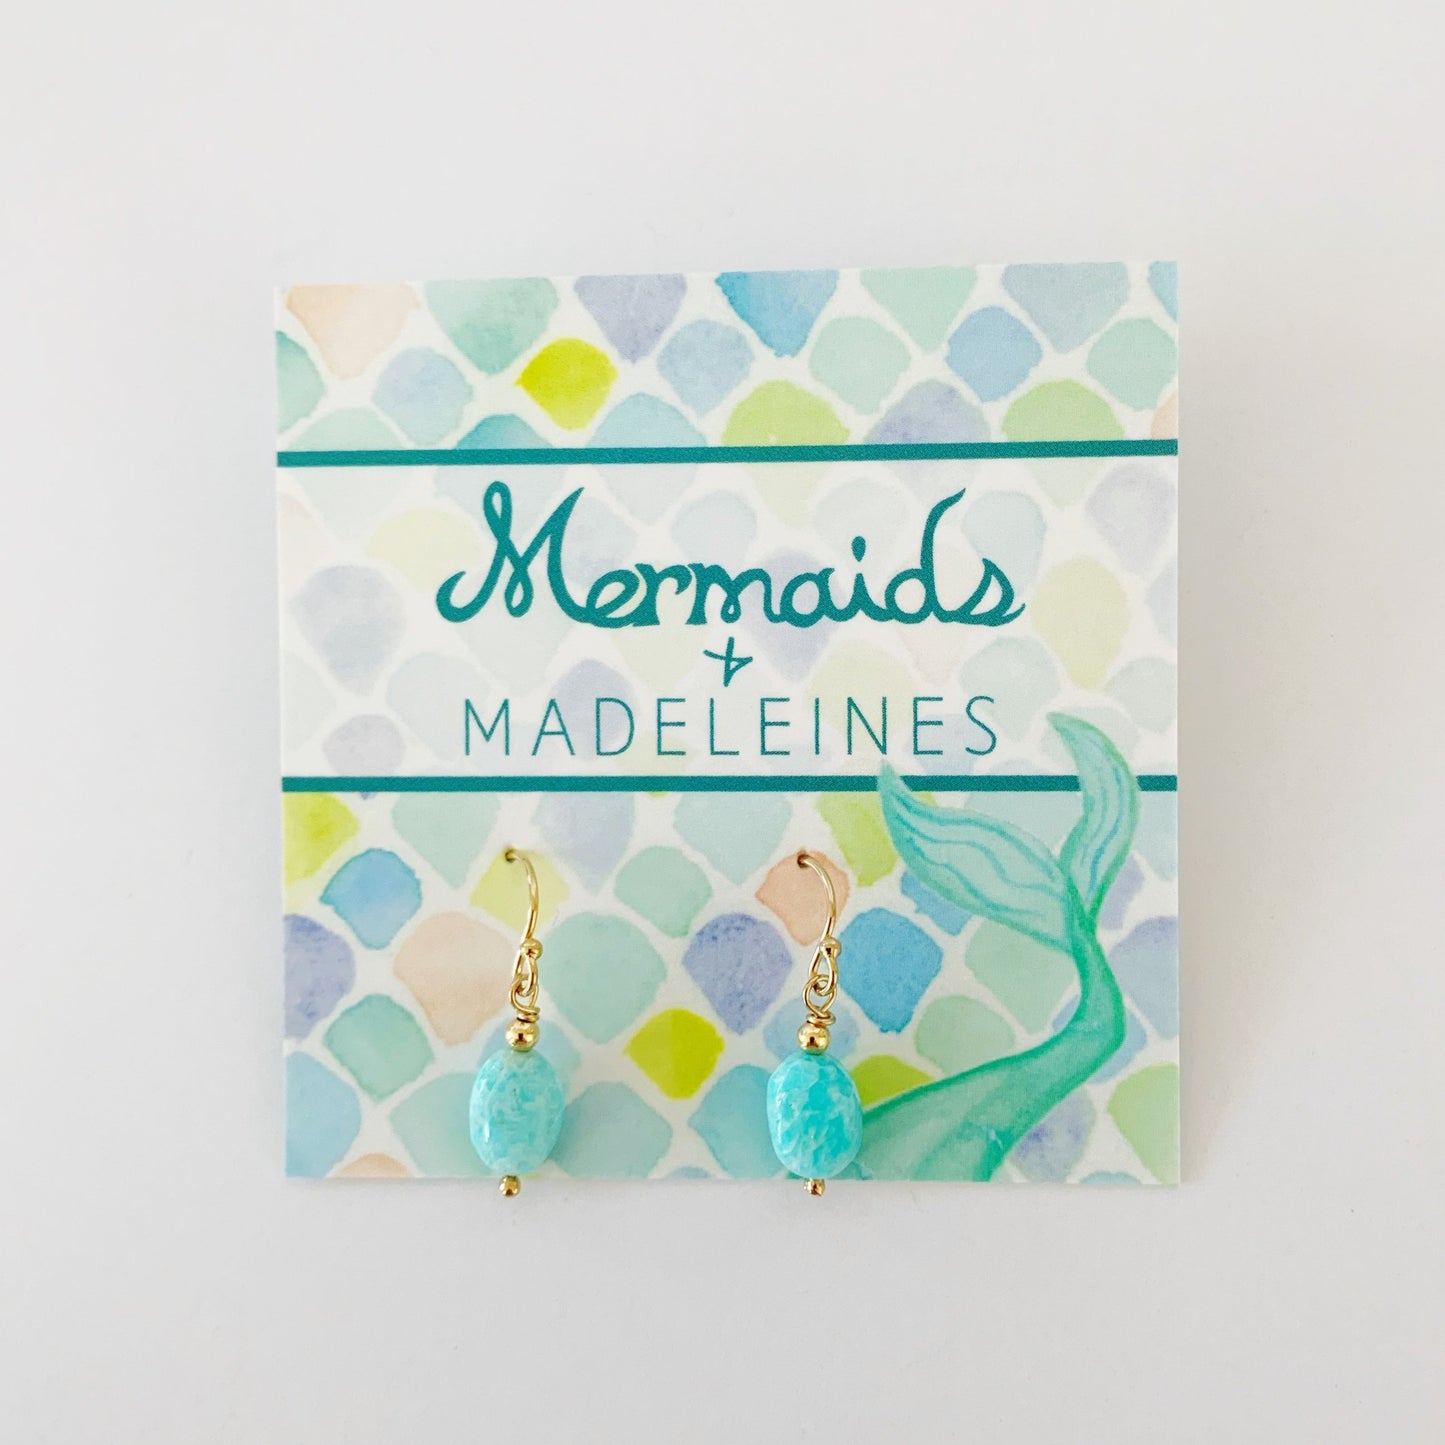 The laguna earrings in 14k gold filled. This pair is created with 14k gold filled beads and findings and bright aqua oval shaped beads. This pair is pictured on a mermaids and madeleines earring card and photographed on a white background